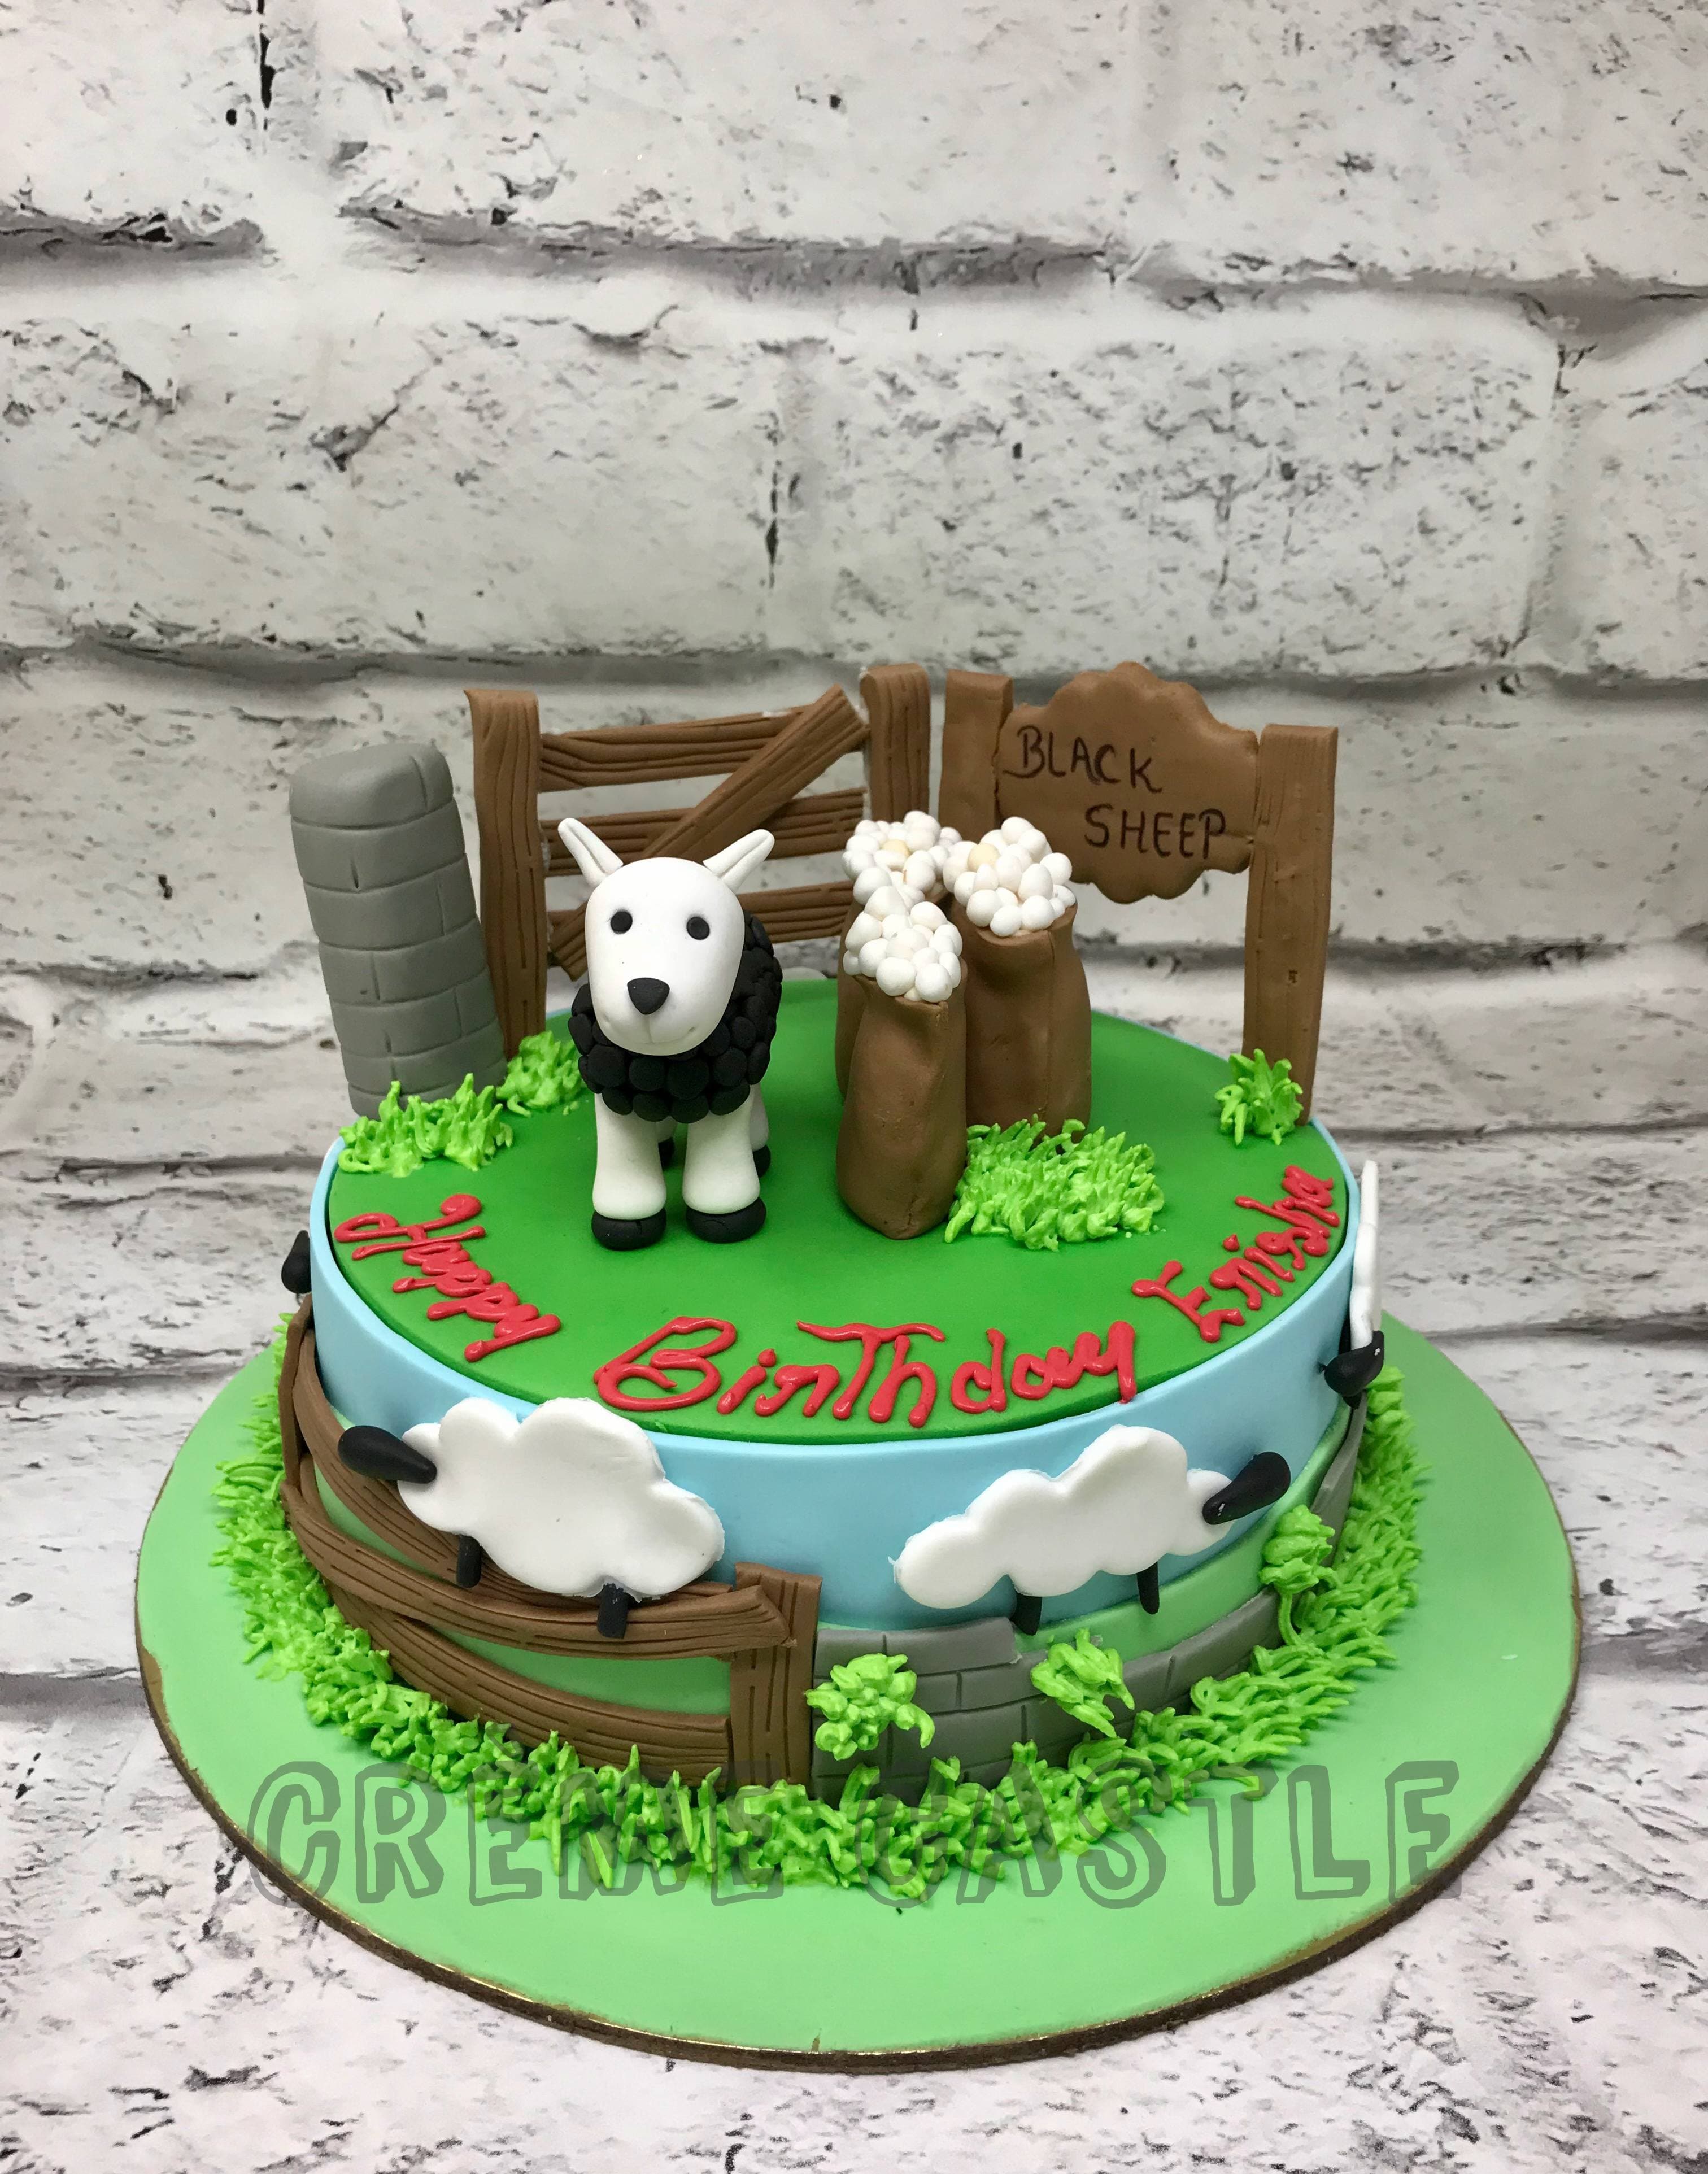 A Cow Cake, Dog Bath, and Latest Obsessions | Living My Full Life